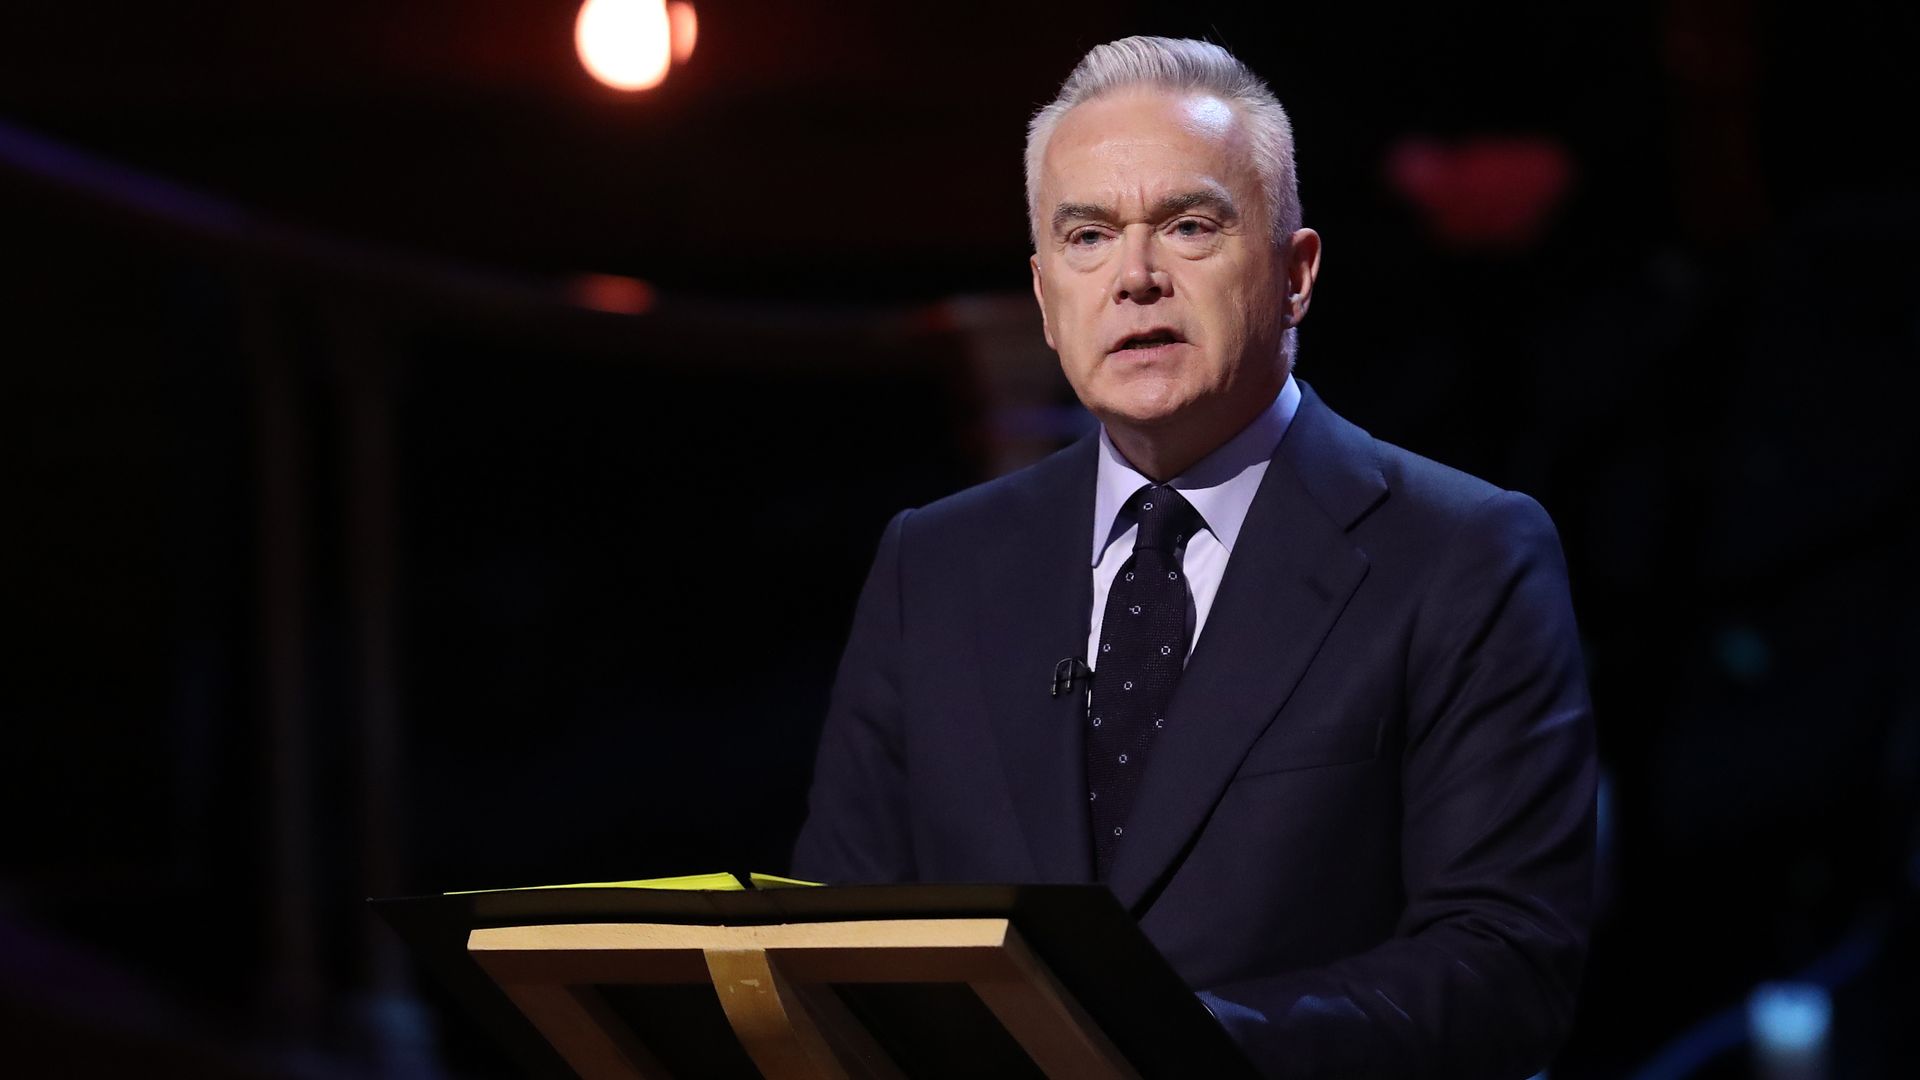 BBC newsreader Huw Edwards speaks at the UK Holocaust Memorial Day Commemorative Ceremony in Westminster on January 27, 2020 in London, England. 2020 marks the 75th anniversary of the liberation of Auschwitz-Birkenau. Holocaust memorial day takes place an